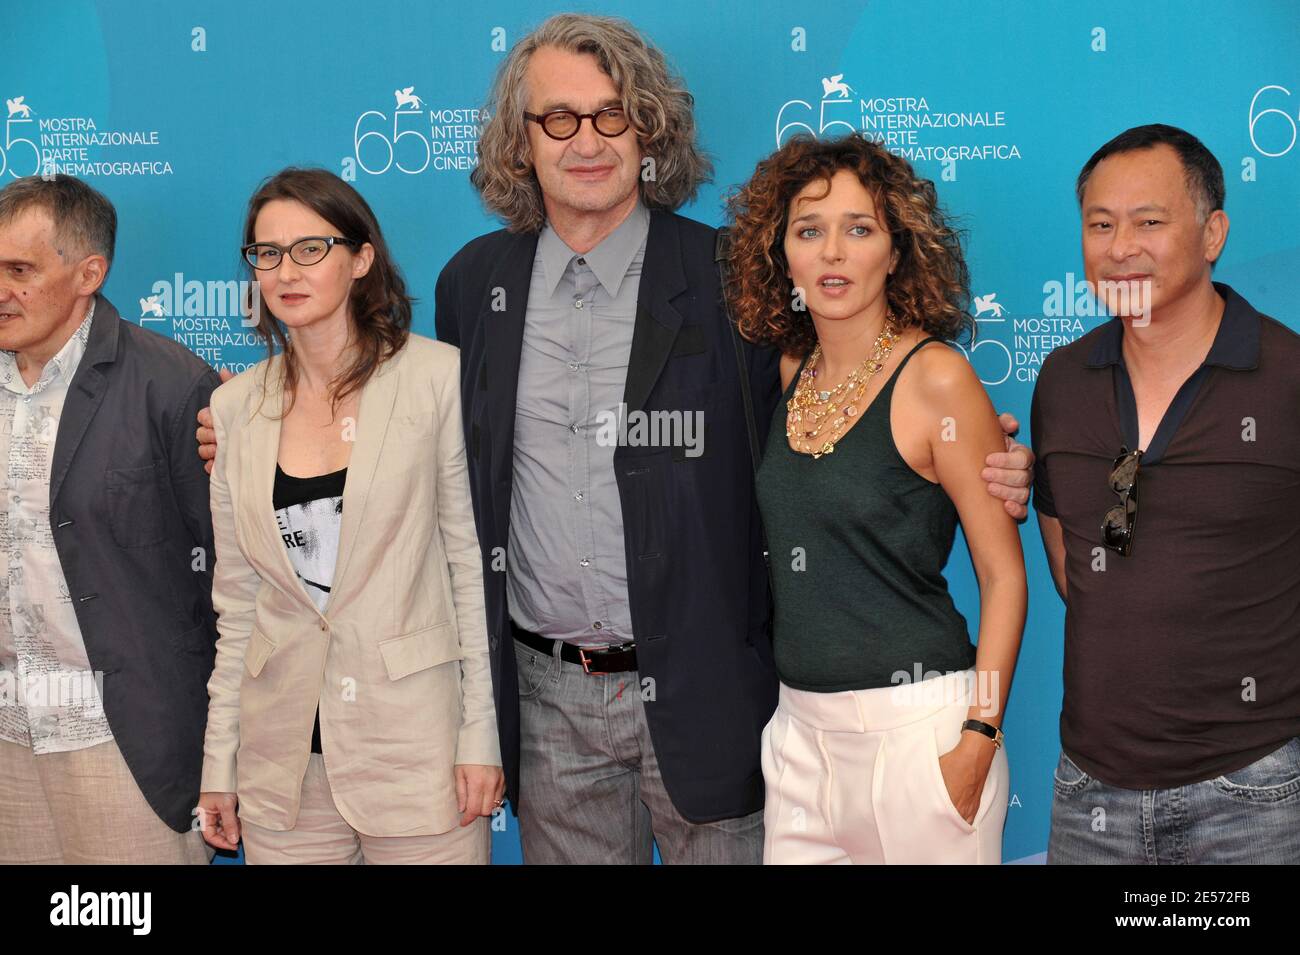 Jury Members of the 65th Mostra Venice International Film Festival, (L-R) Juriy Arabov, Lucrecia Martel, president Wim Wenders, Valeria Golino and Johnnie To pose at a photocall at Venice Lido, Italy on August 27, 2008, ahead of the opening ceremony to be held this evening. Photo by Thierry Orban/ABACAPRESS/COM Stock Photo